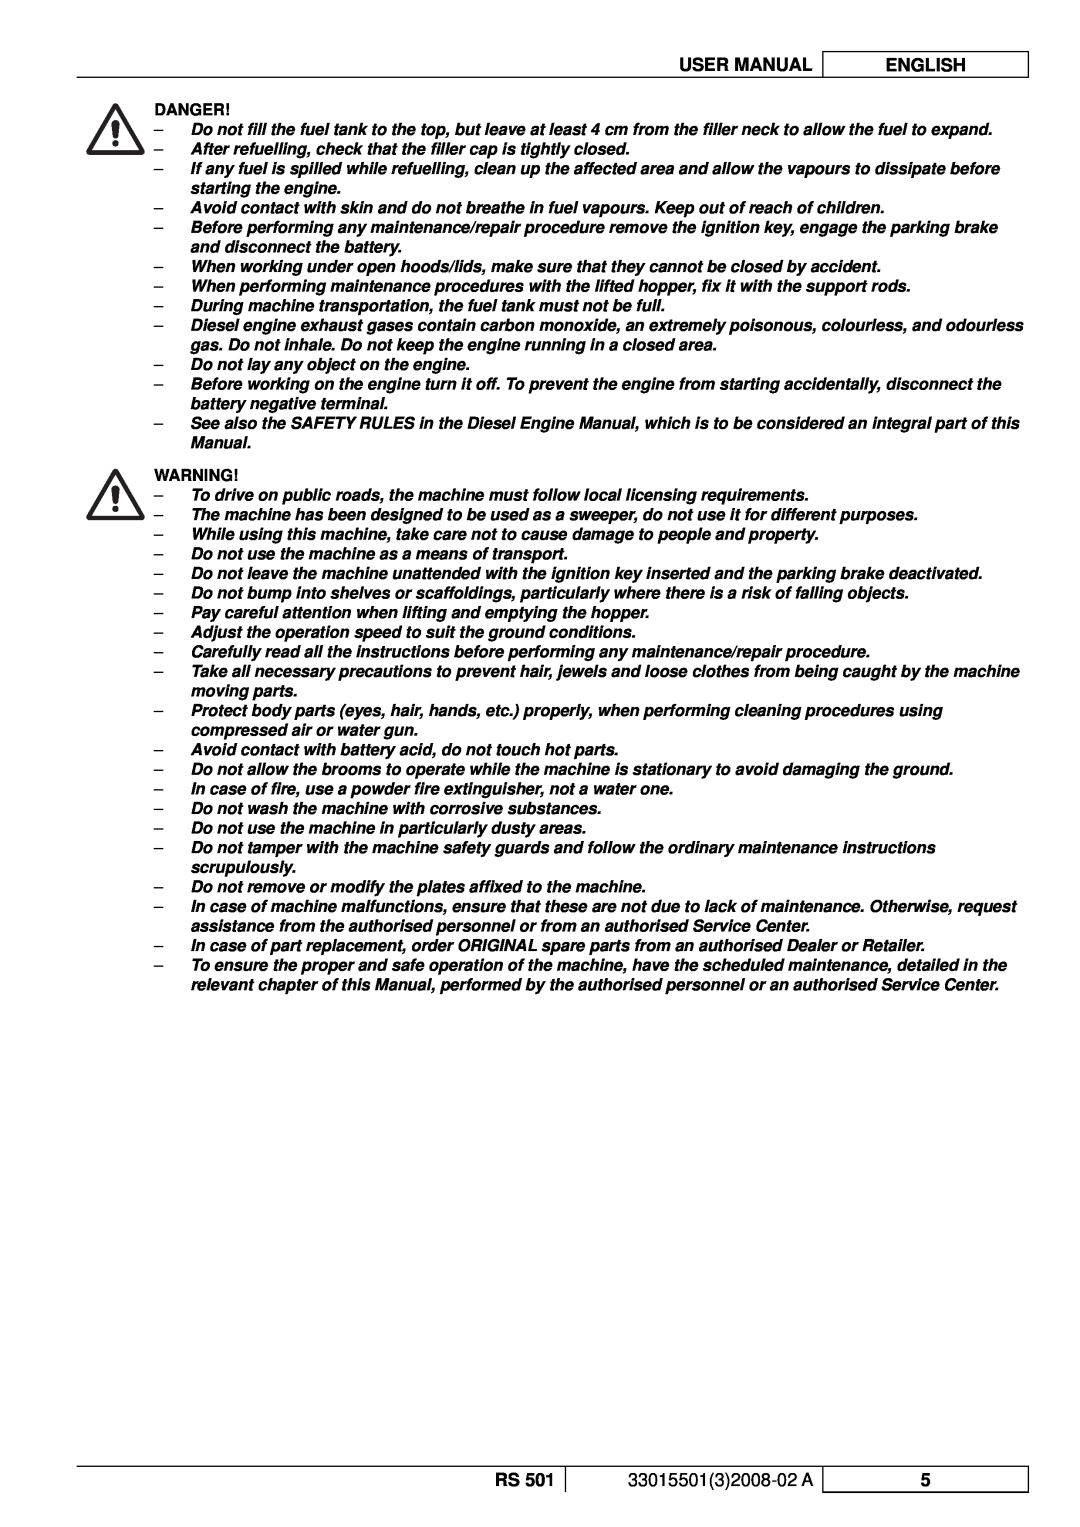 Nilfisk-ALTO RS 501 User Manual, English, 3301550132008-02A, Danger, Do not lay any object on the engine 